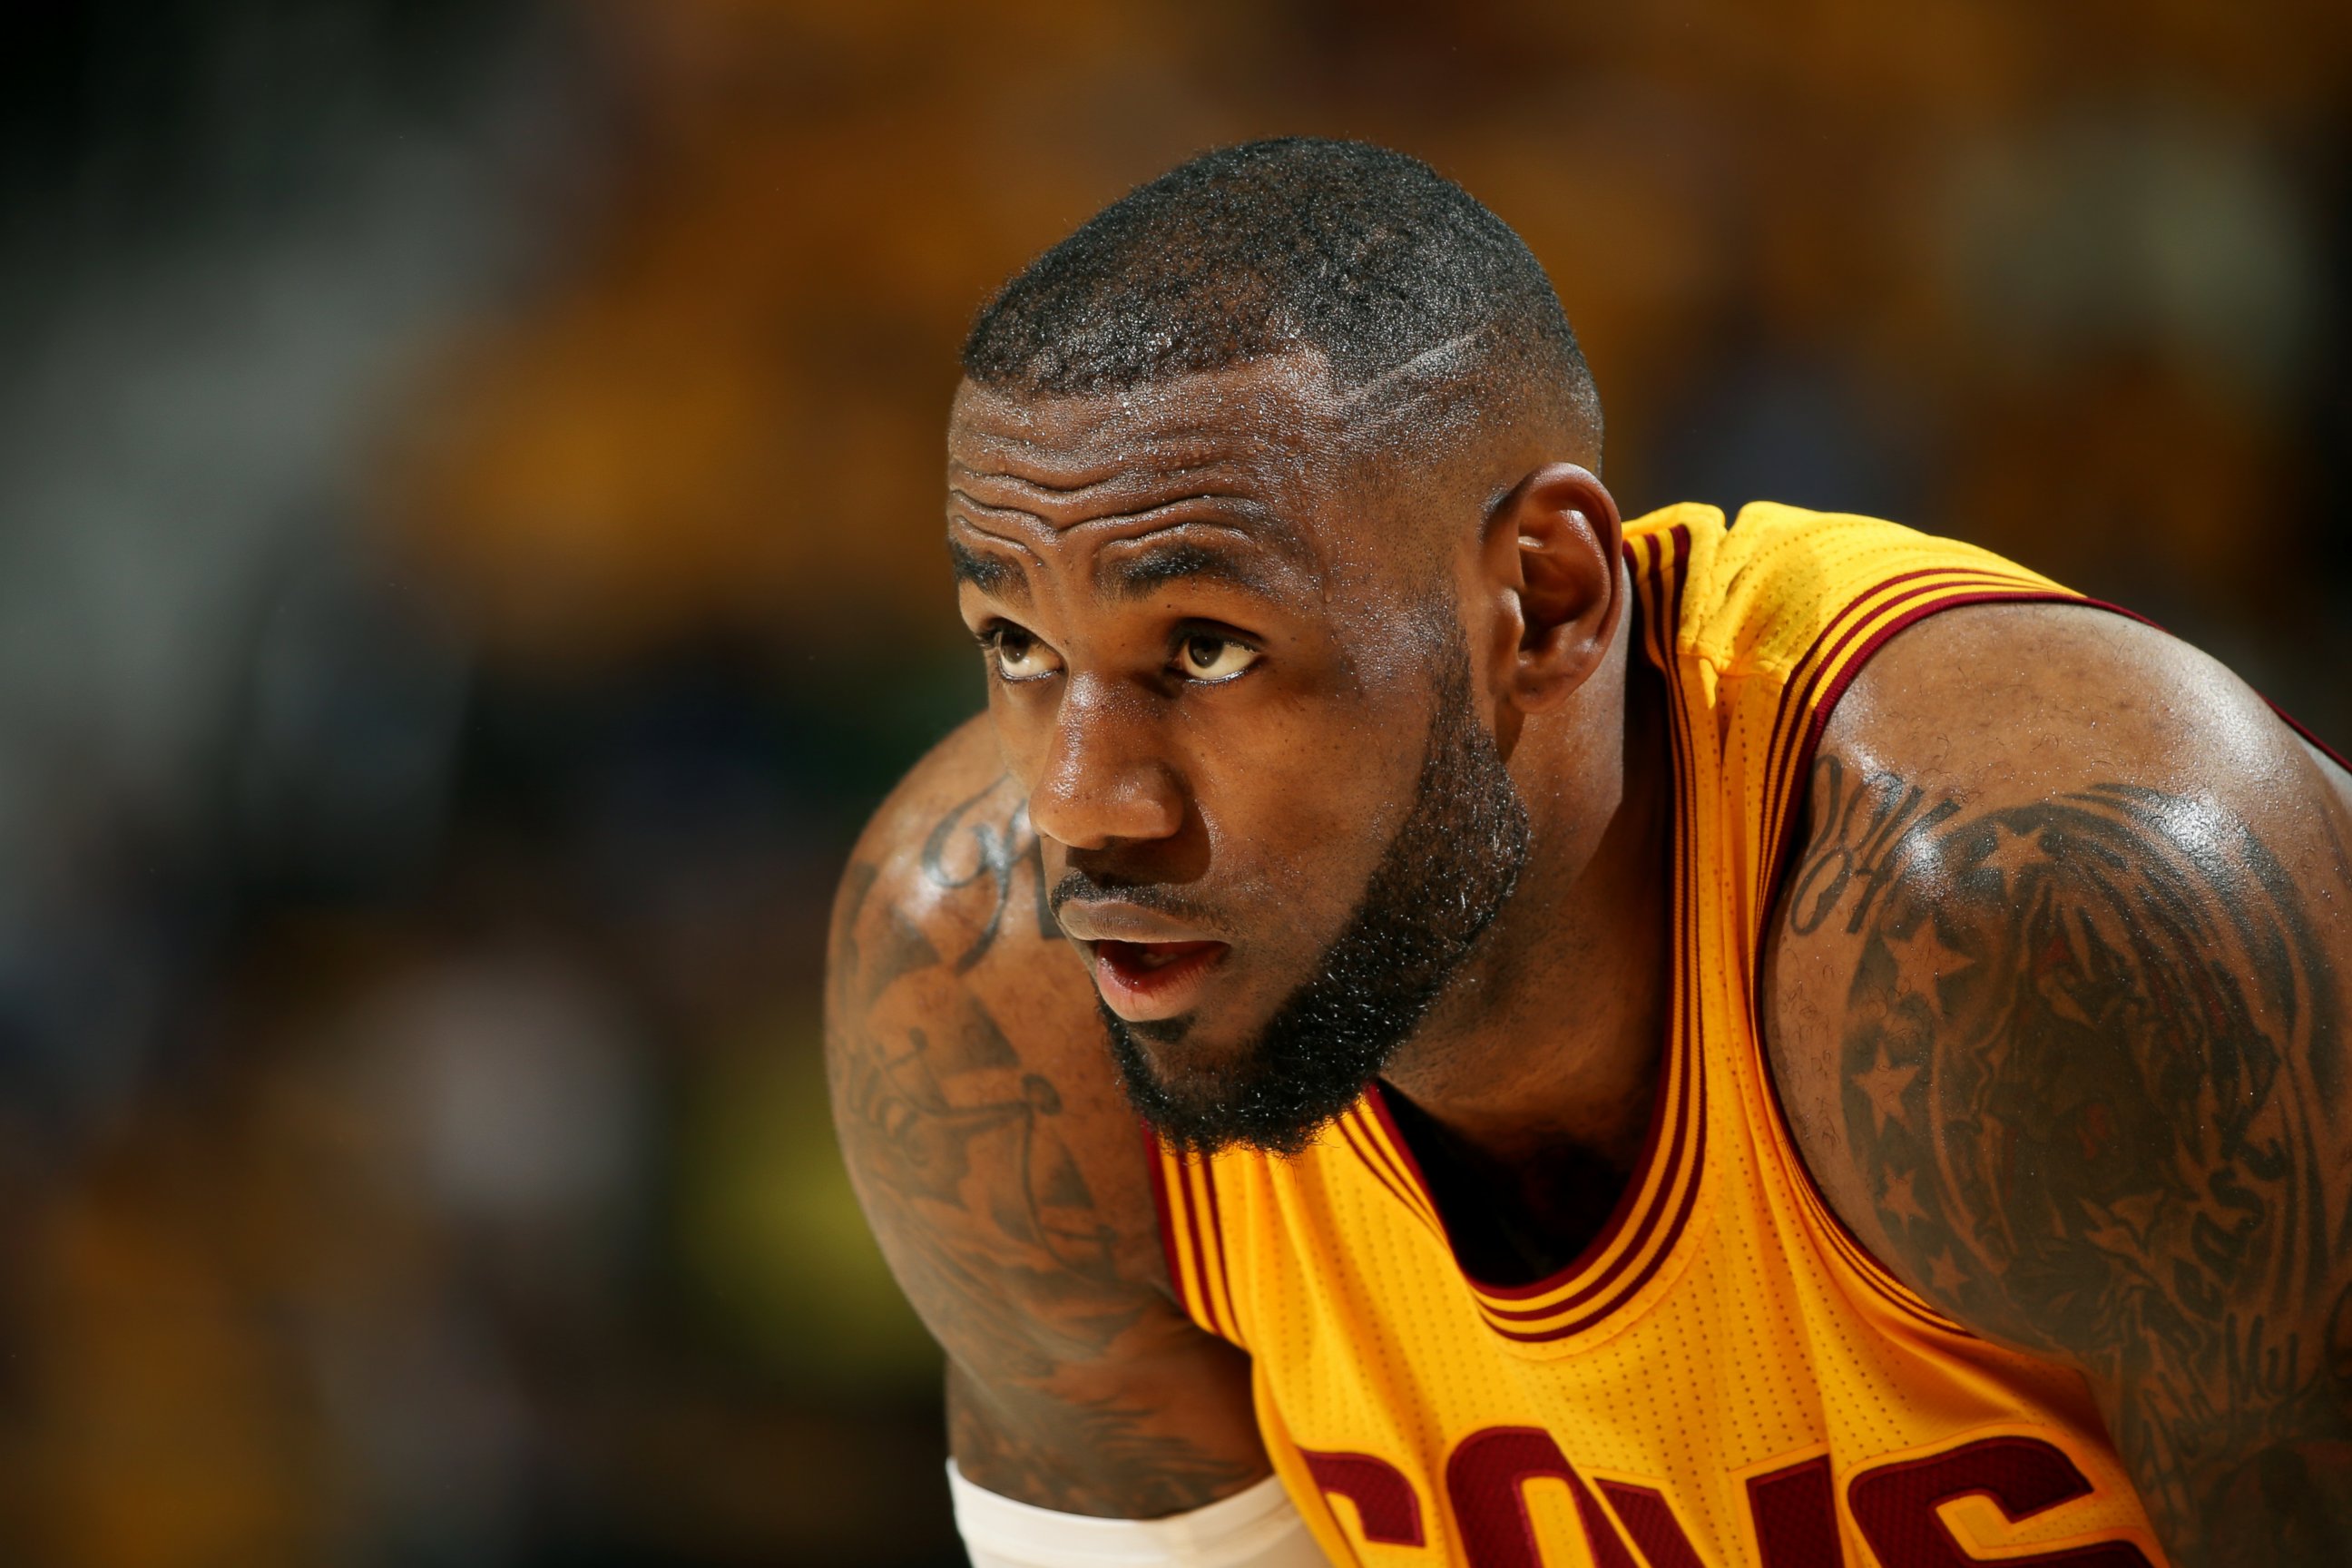 PHOTO: LeBron James of the Cleveland Cavaliers stands on the court during Game Four of the Eastern Conference Finals against the Atlanta Hawks during the 2015 NBA Playoffs, May 26, 2015 at Quicken Loans Arena in Cleveland. 